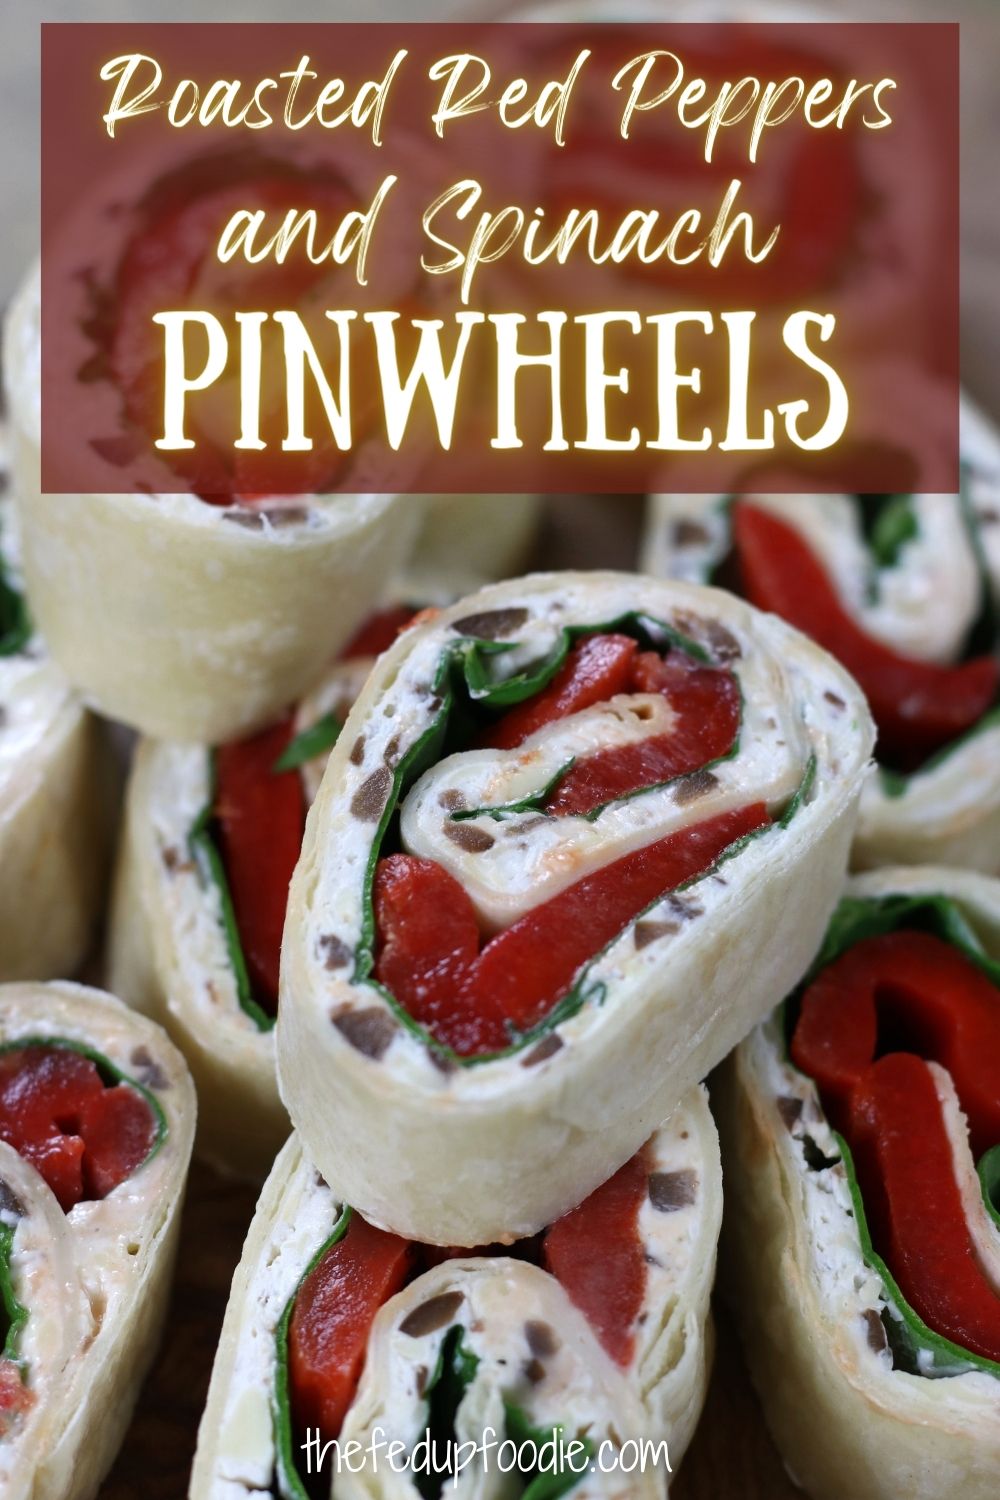 These Spinach Pinwheels with roasted red peppers are incredibly easy to make and perfectly festive for holiday tables. A blend of cream cheese, olives and cheddar makes for a luxuriously creamy appetizer that is loaded with flavor.  #HolidayAppetizers #HolidayAppetizersEasy #PinwheelAppetizers #EasyPinwheelAppetizers #TortillaRollUps #BestPinwheelAppetizersCreamCheeses